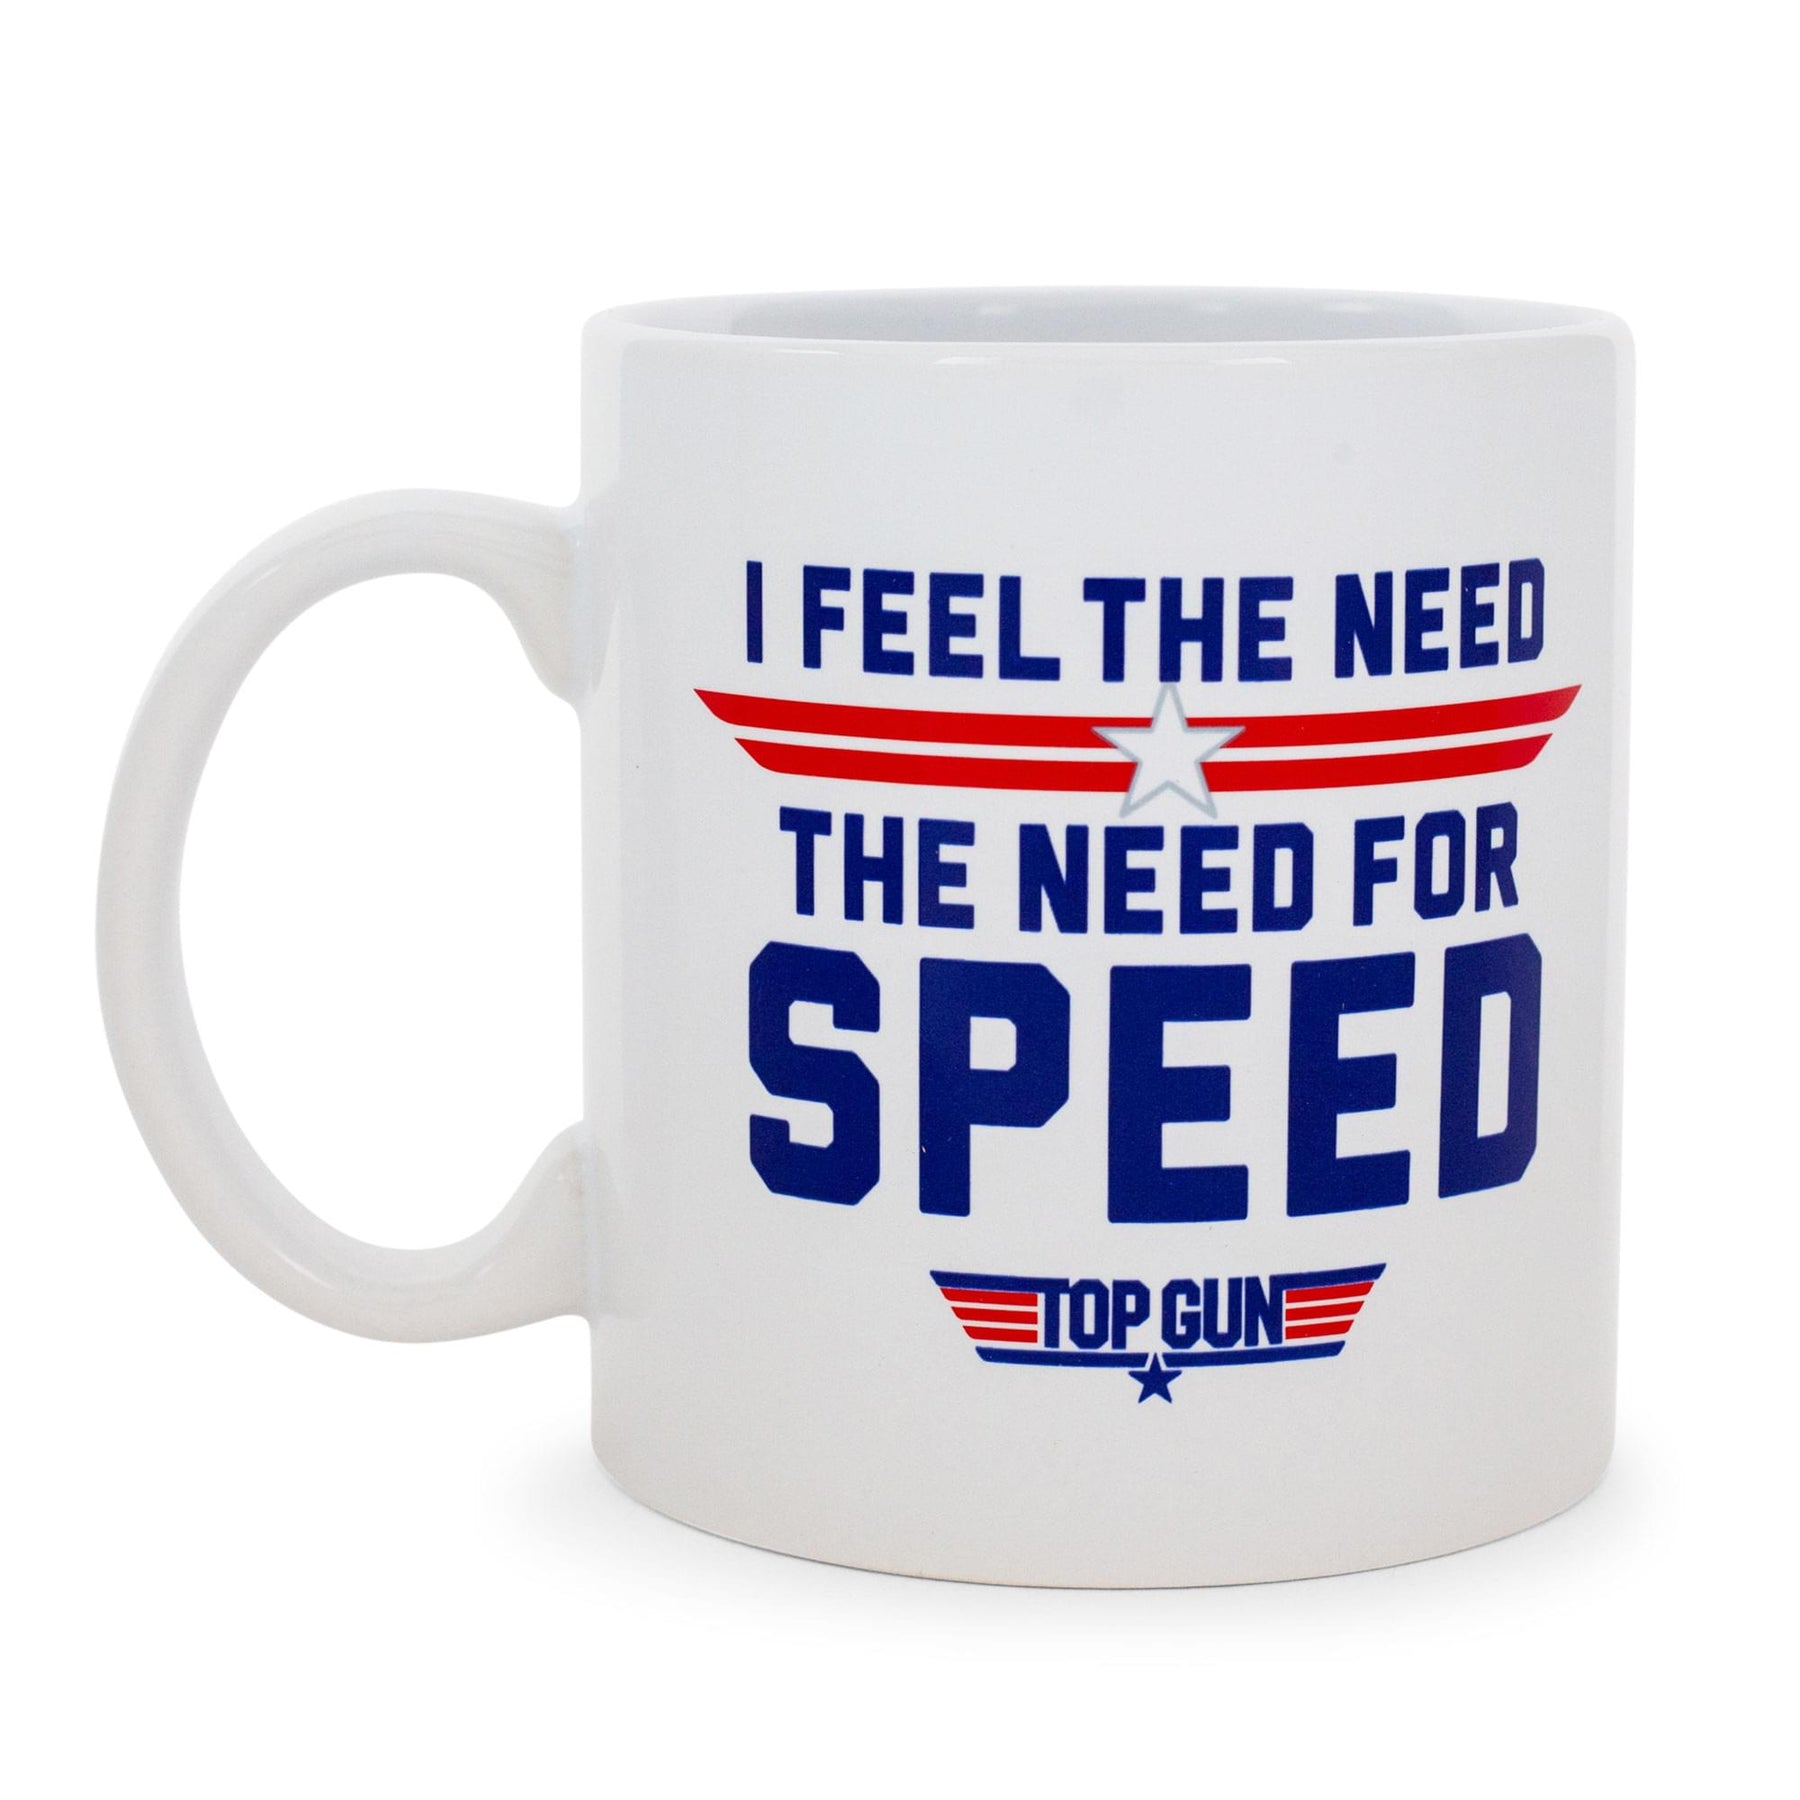 Top Gun "The Need For Speed" Ceramic Mug | Holds 20 Ounces